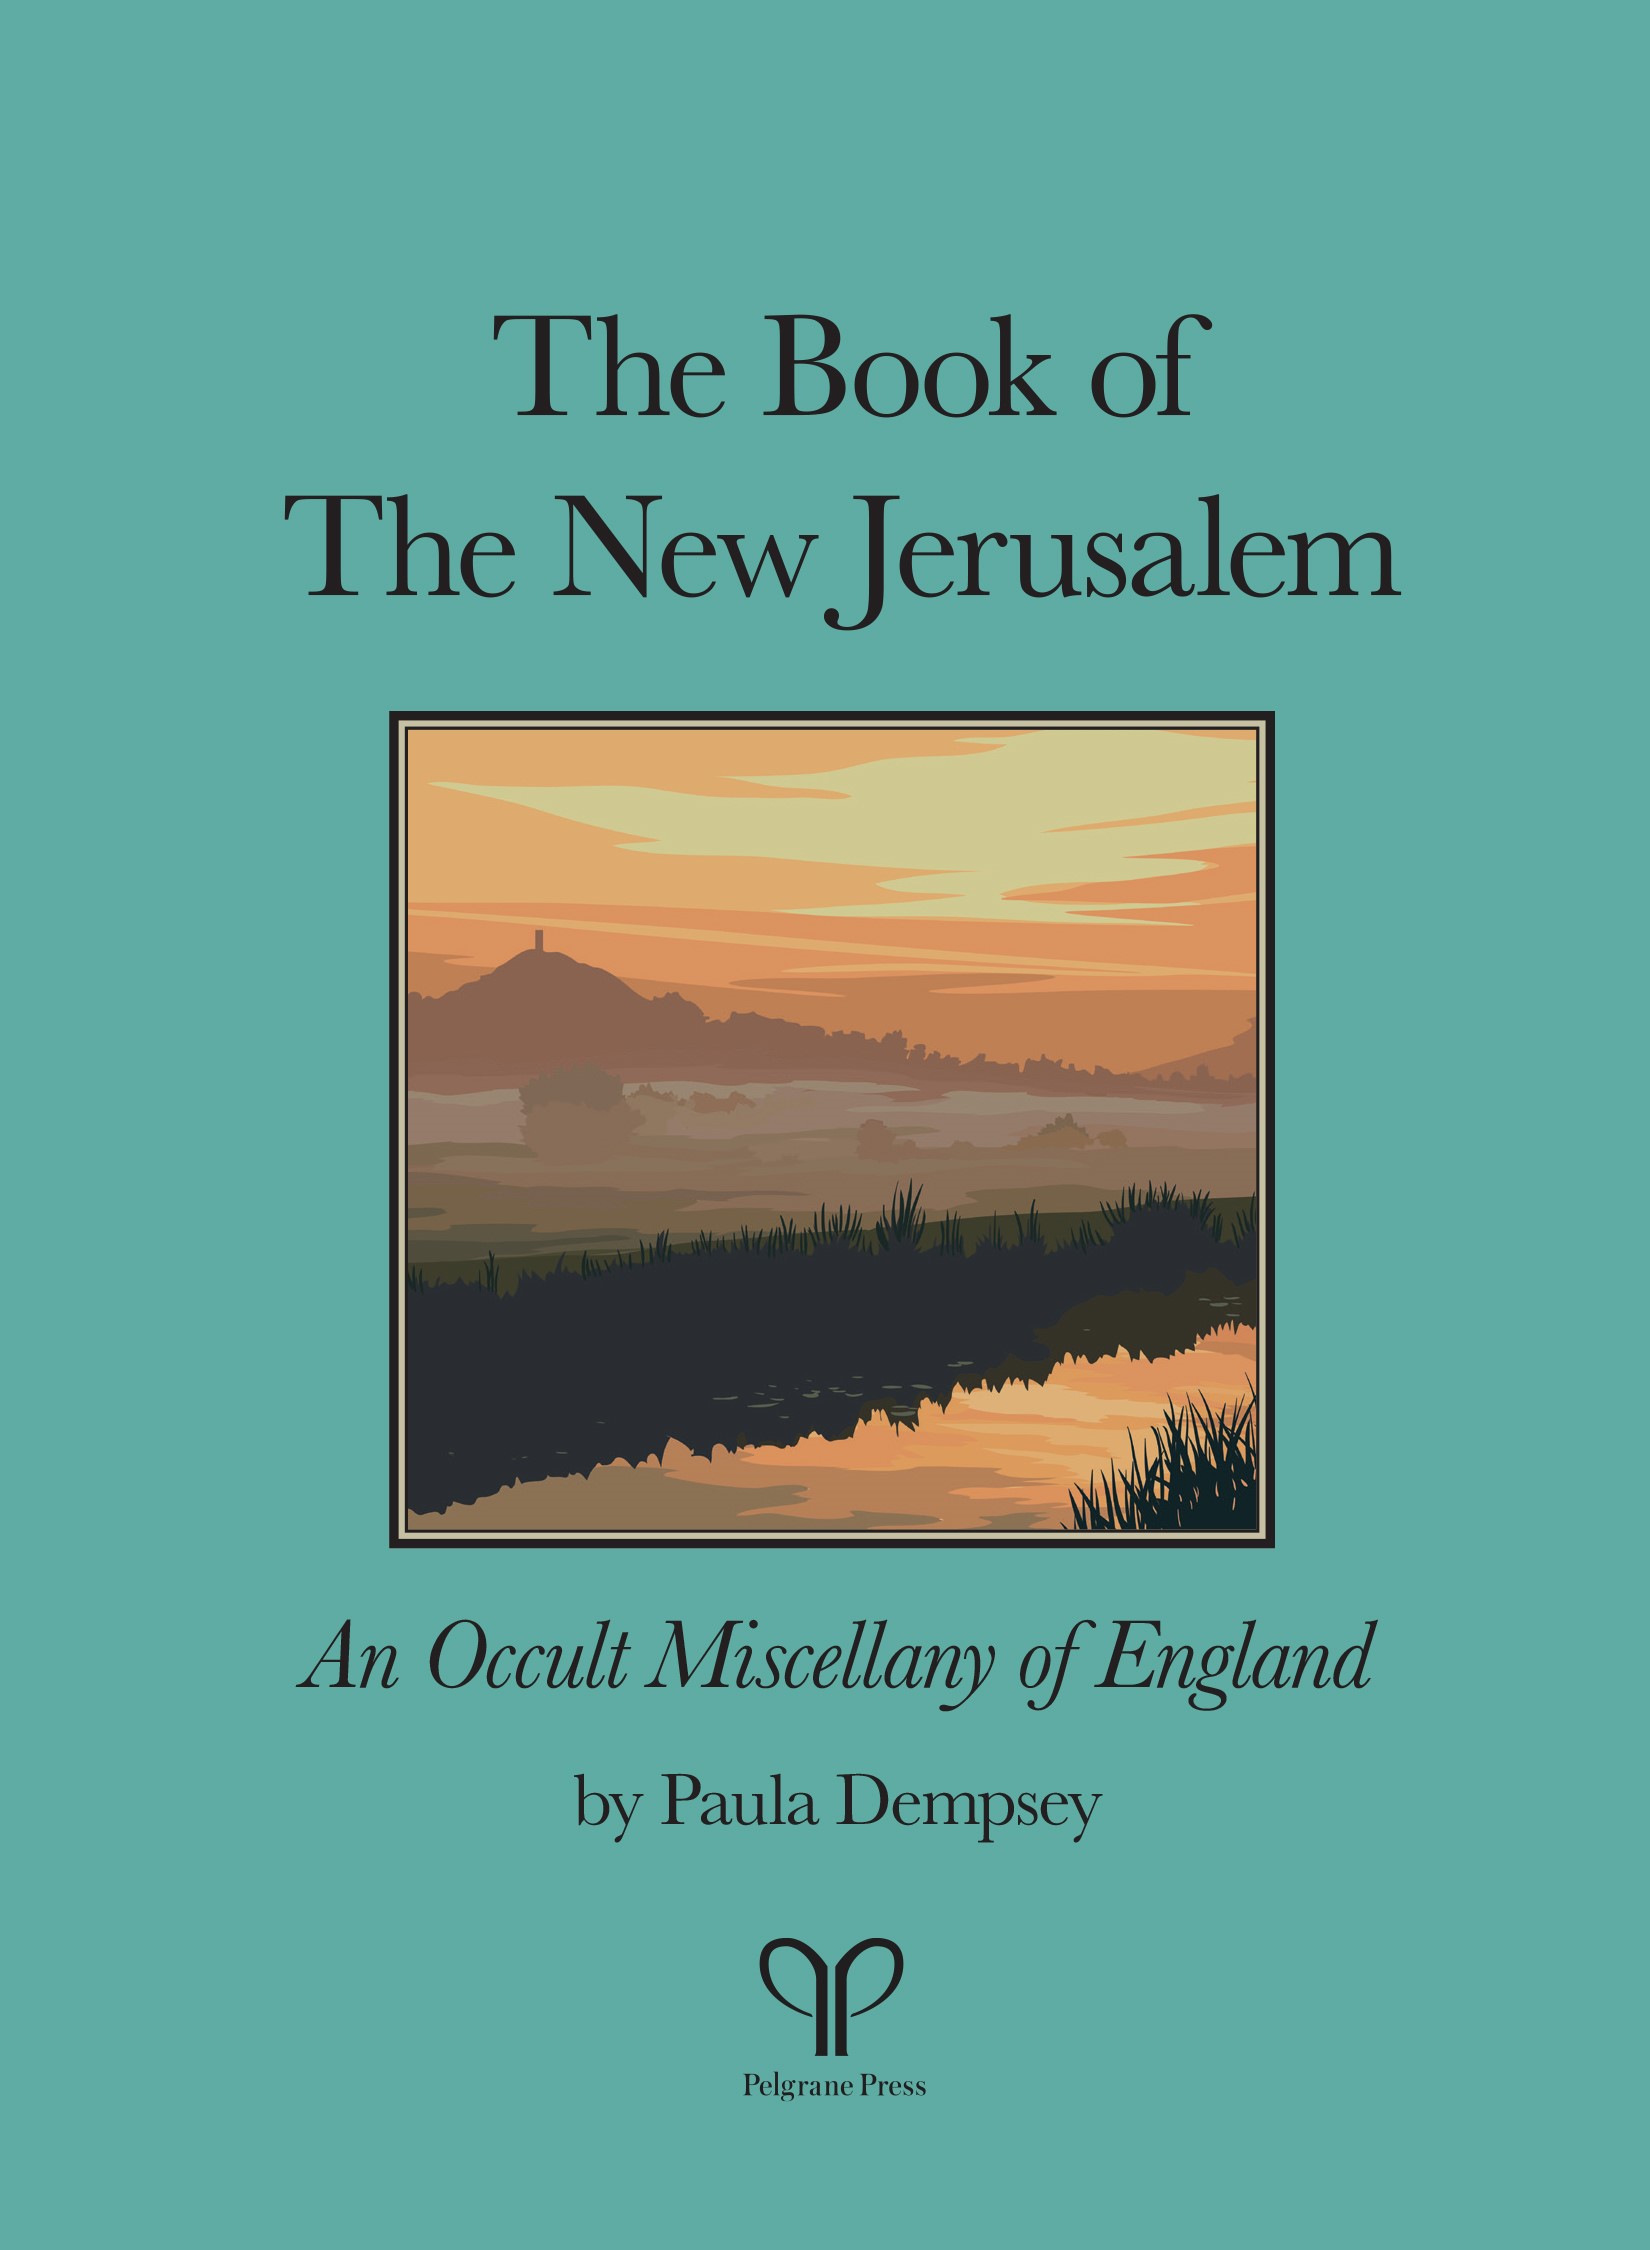  The Book Of The New Jerusalem - An Occult Miscellany of England 